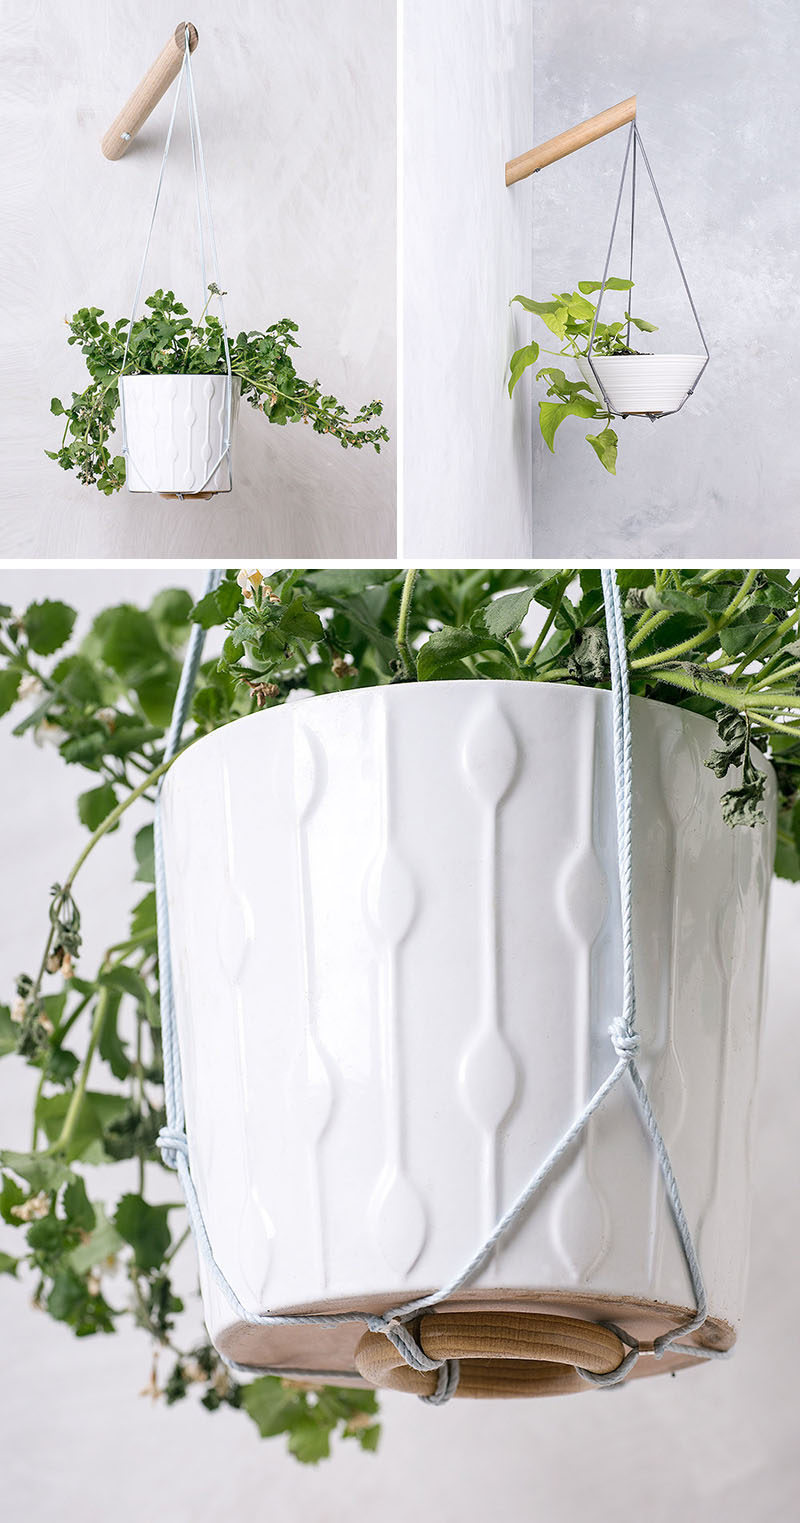 These wall planters allow you have hanging plants wherever you want them simply by attaching them to a wood pole mounted to the wall. #WallMountedPlanters #WallPlanters #Decor #HomeDecor #Plants #Gardening